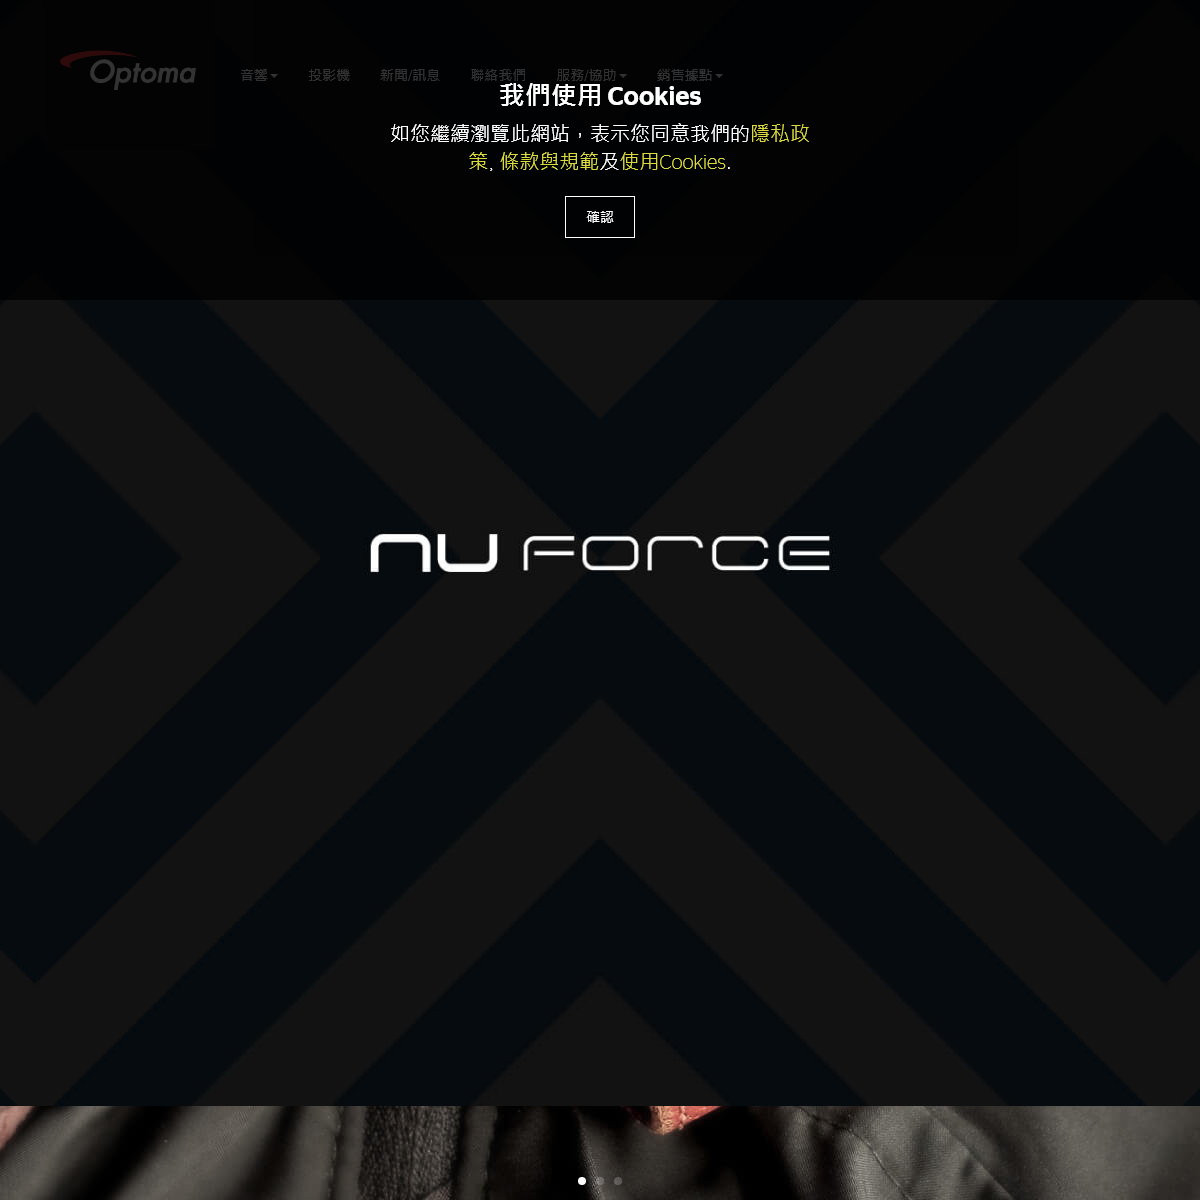 A complete backup of nuforce.com